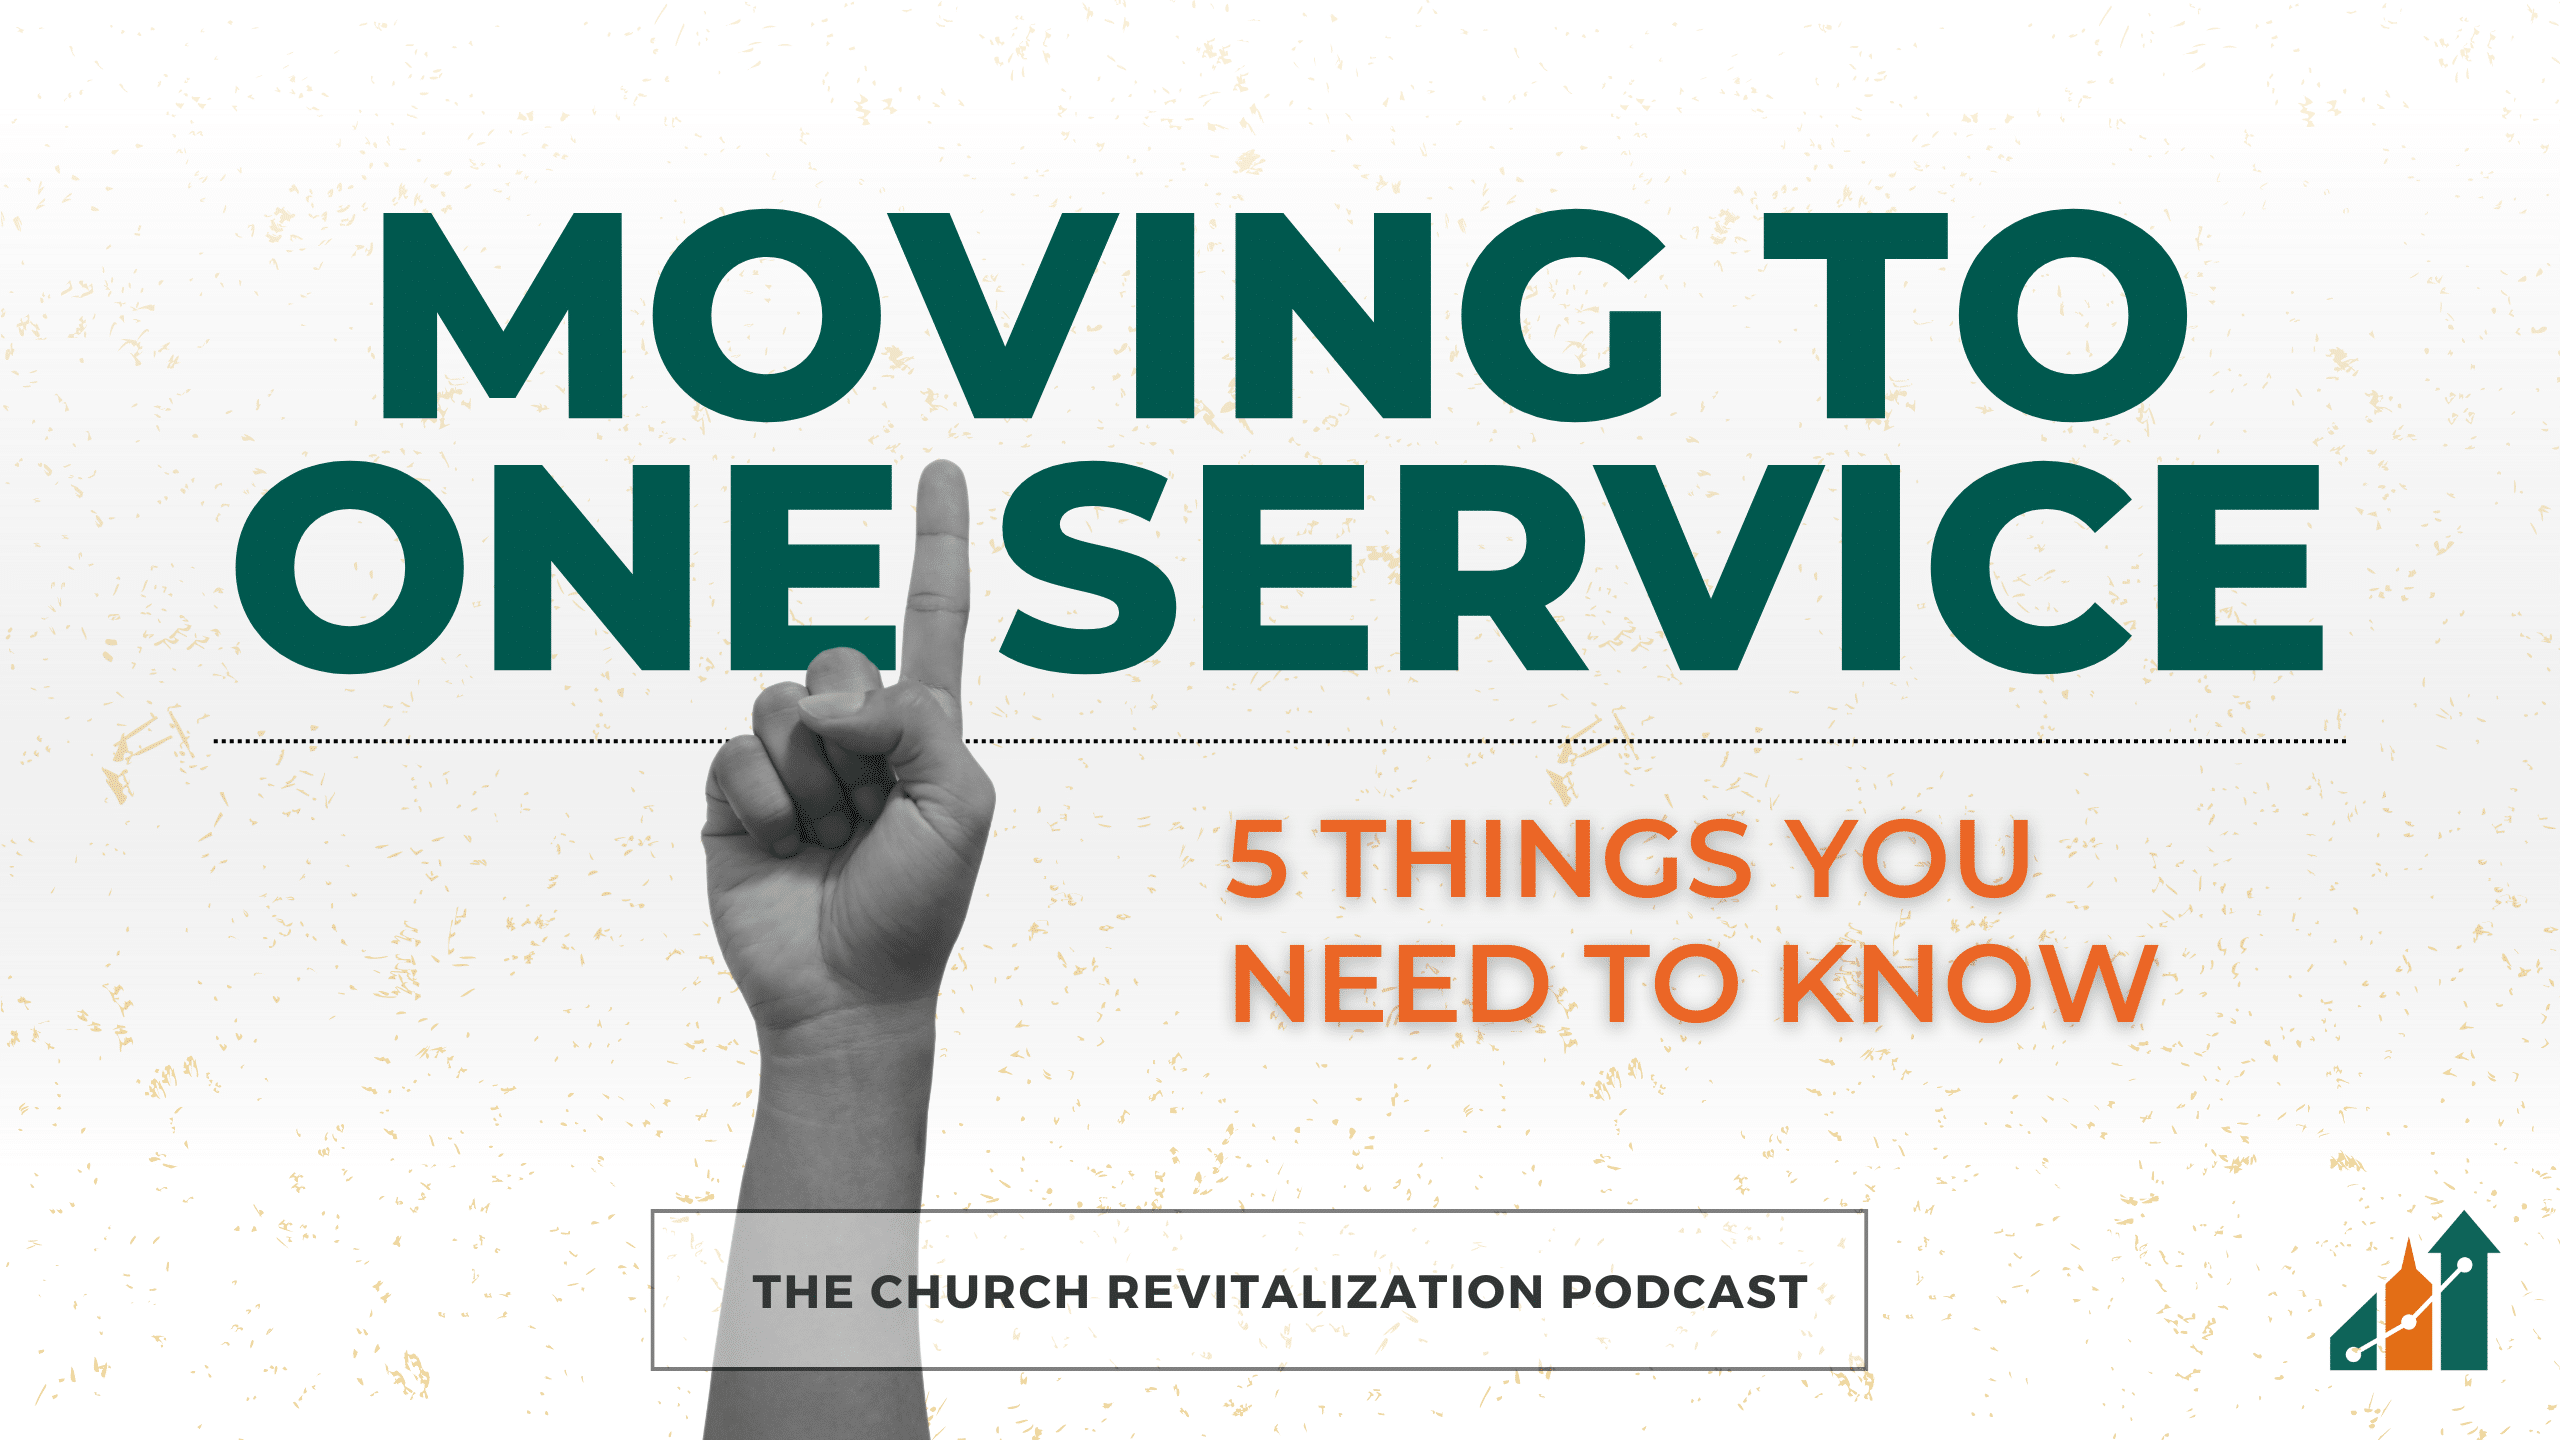 Moving to One Service: 5 Things You Need to Know